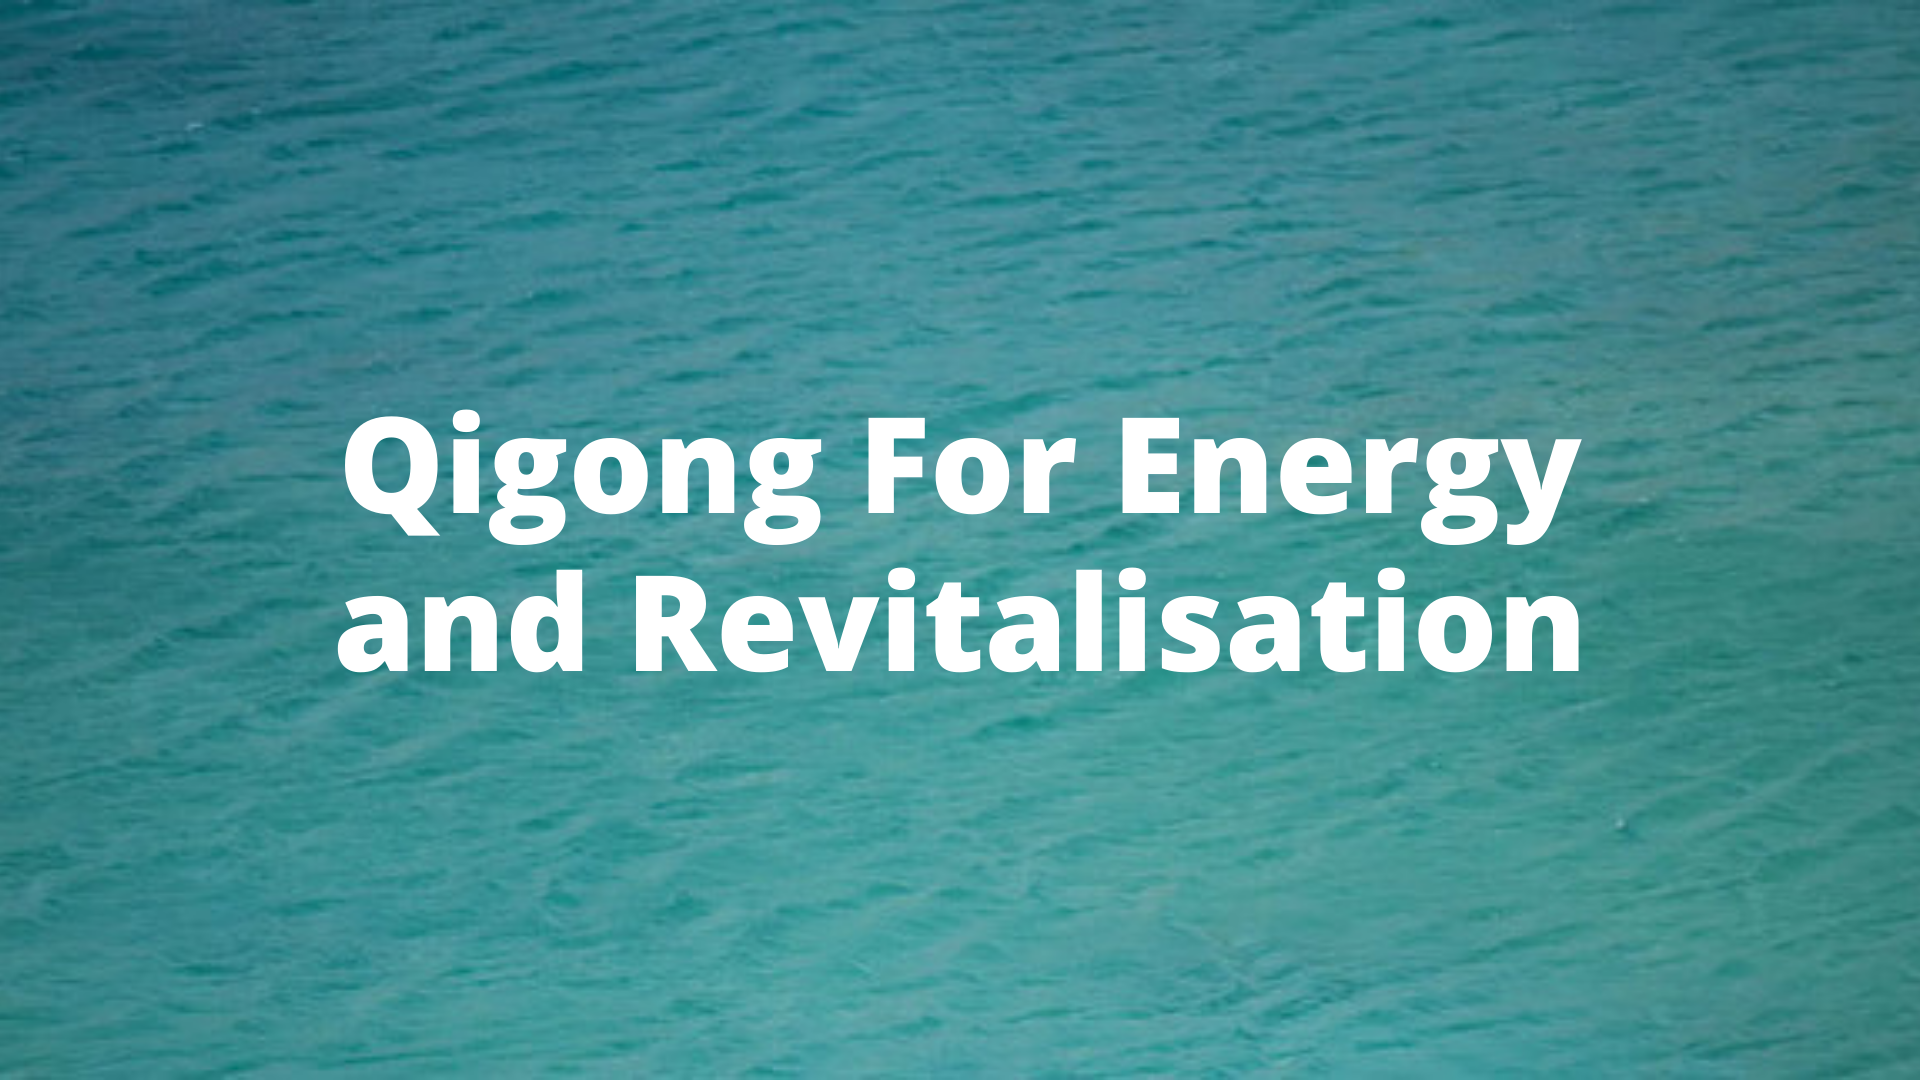 Qigong For Energy and Revitalisation